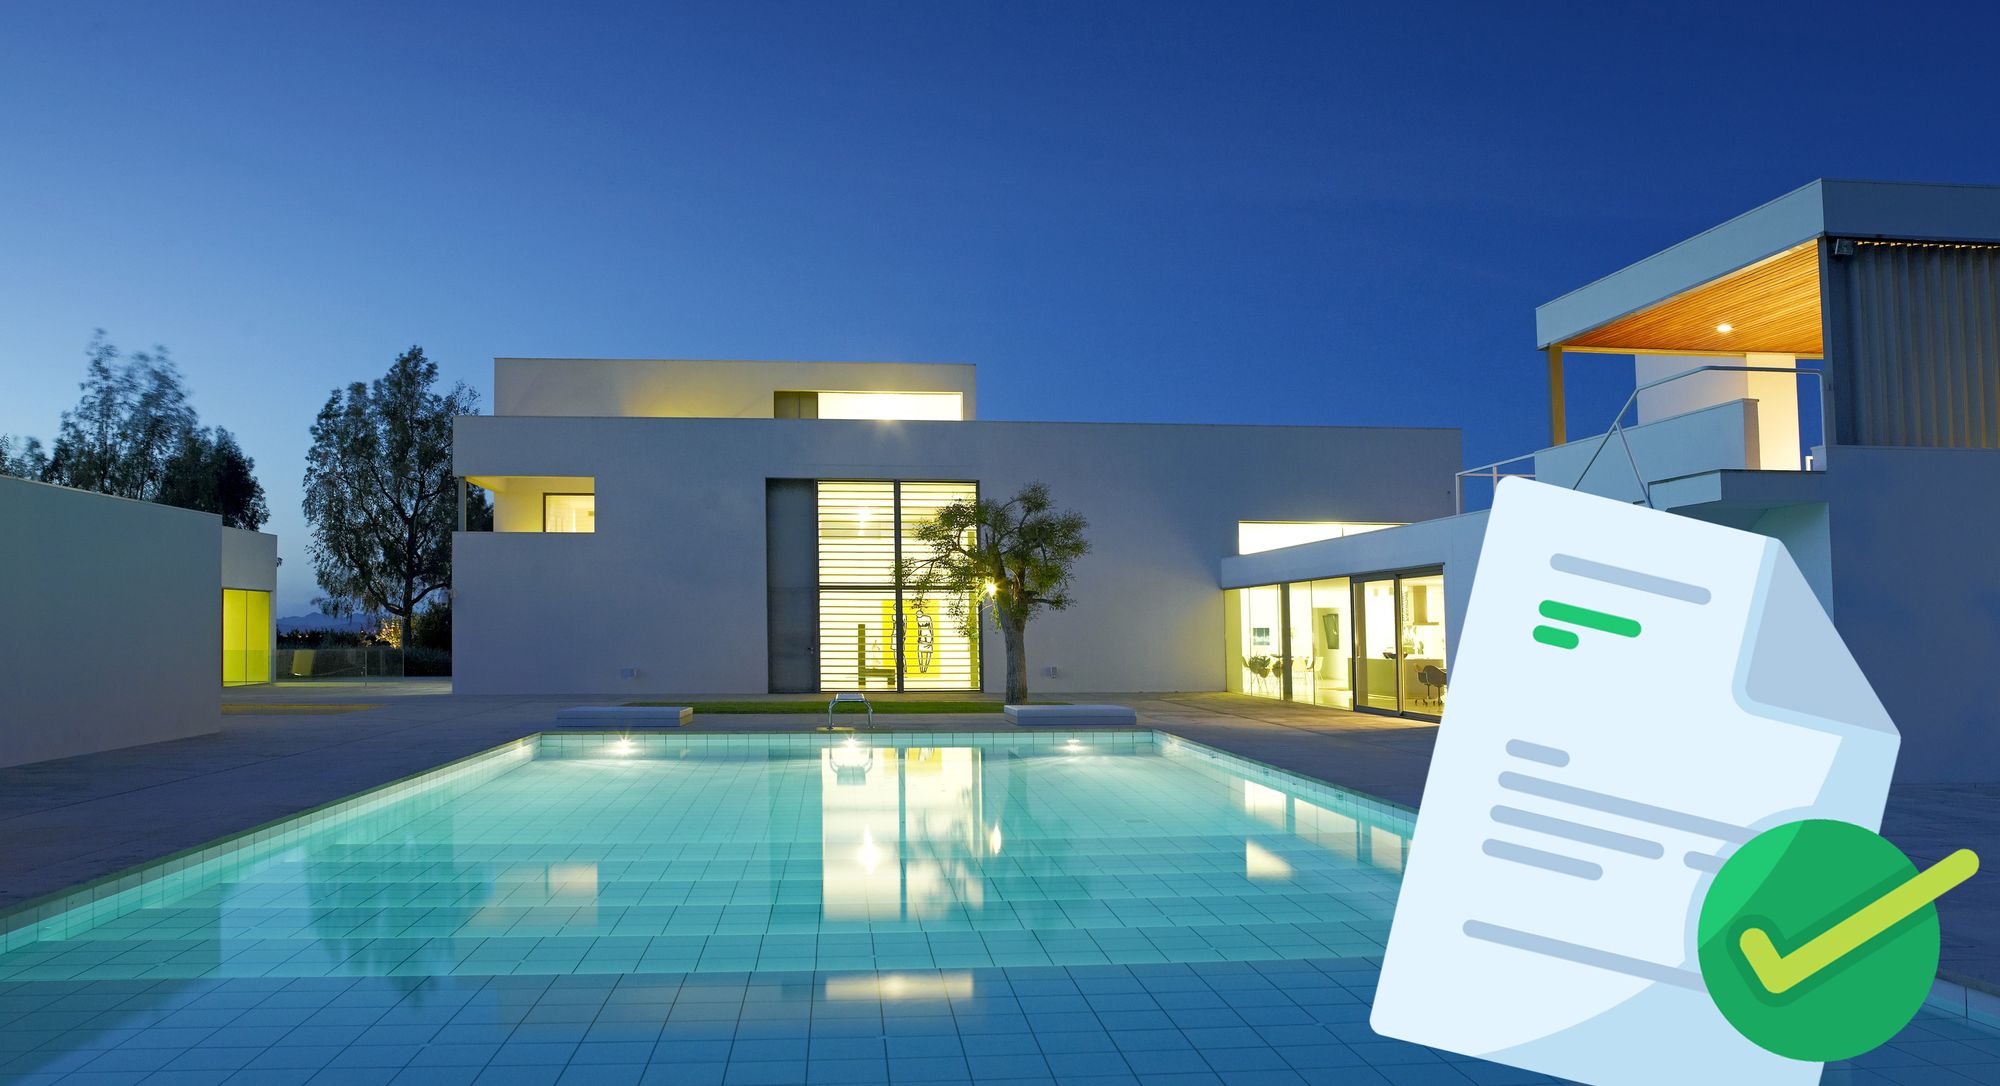 Here's what you need to know about property releases and panoramic freedom.